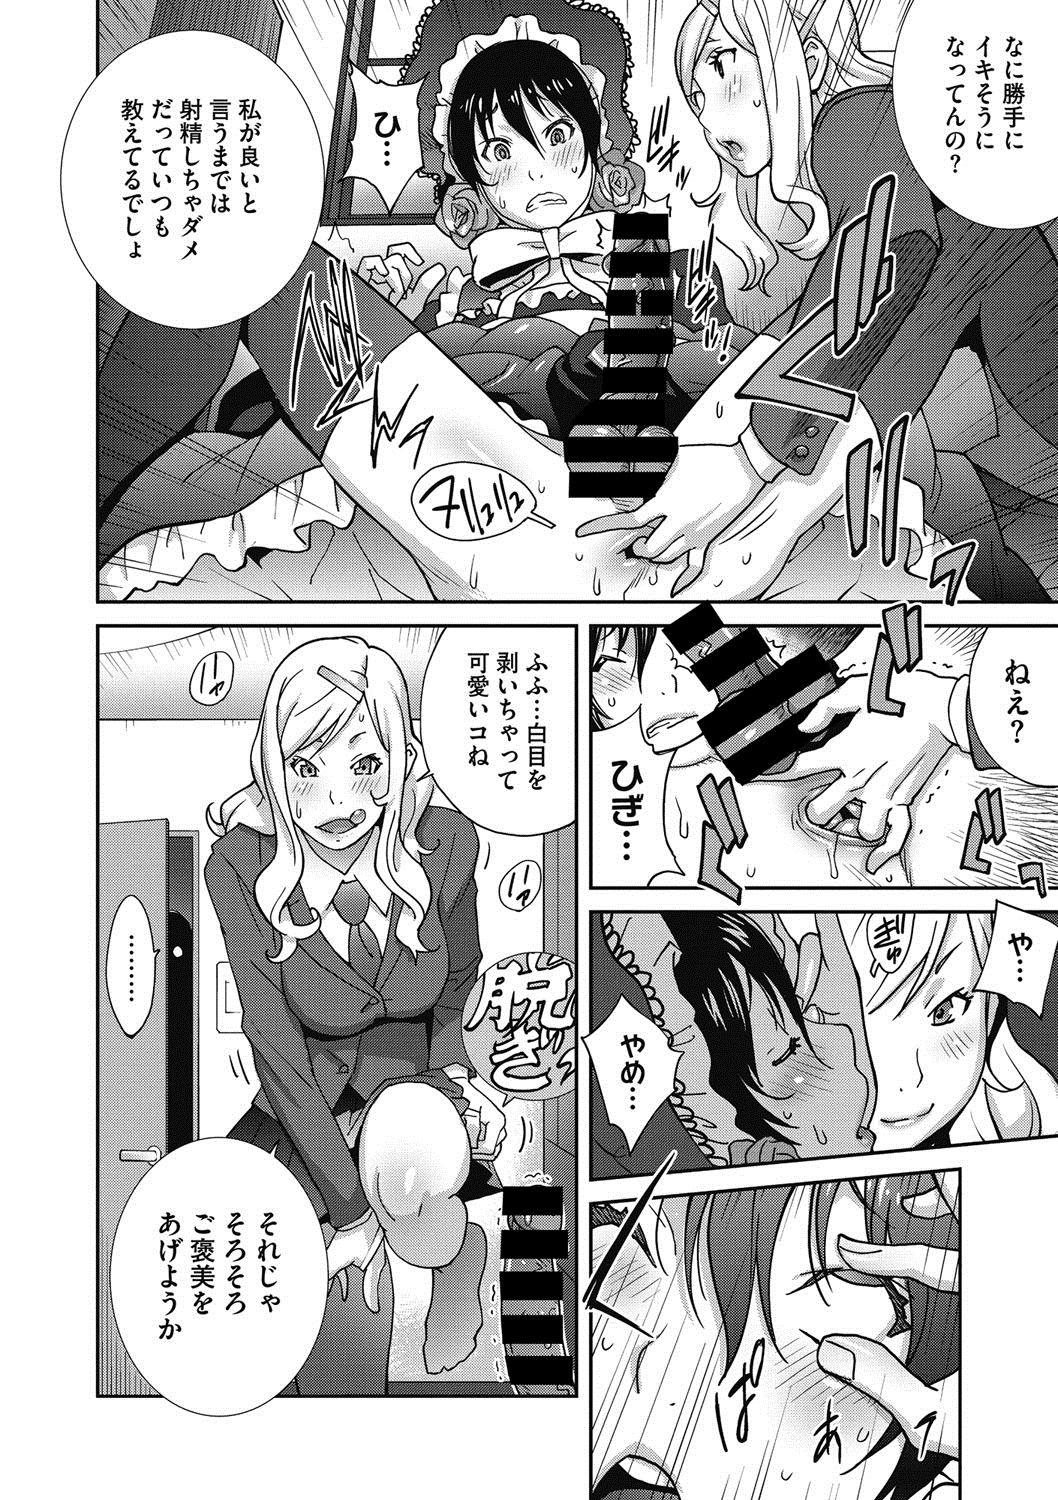 [Kotoyoshi Yumisuke] Haha to Ane to Aoi Ichigo no Fromage - Fromage of mother and an older sister and a blue strawberry Ch. 1-4 7